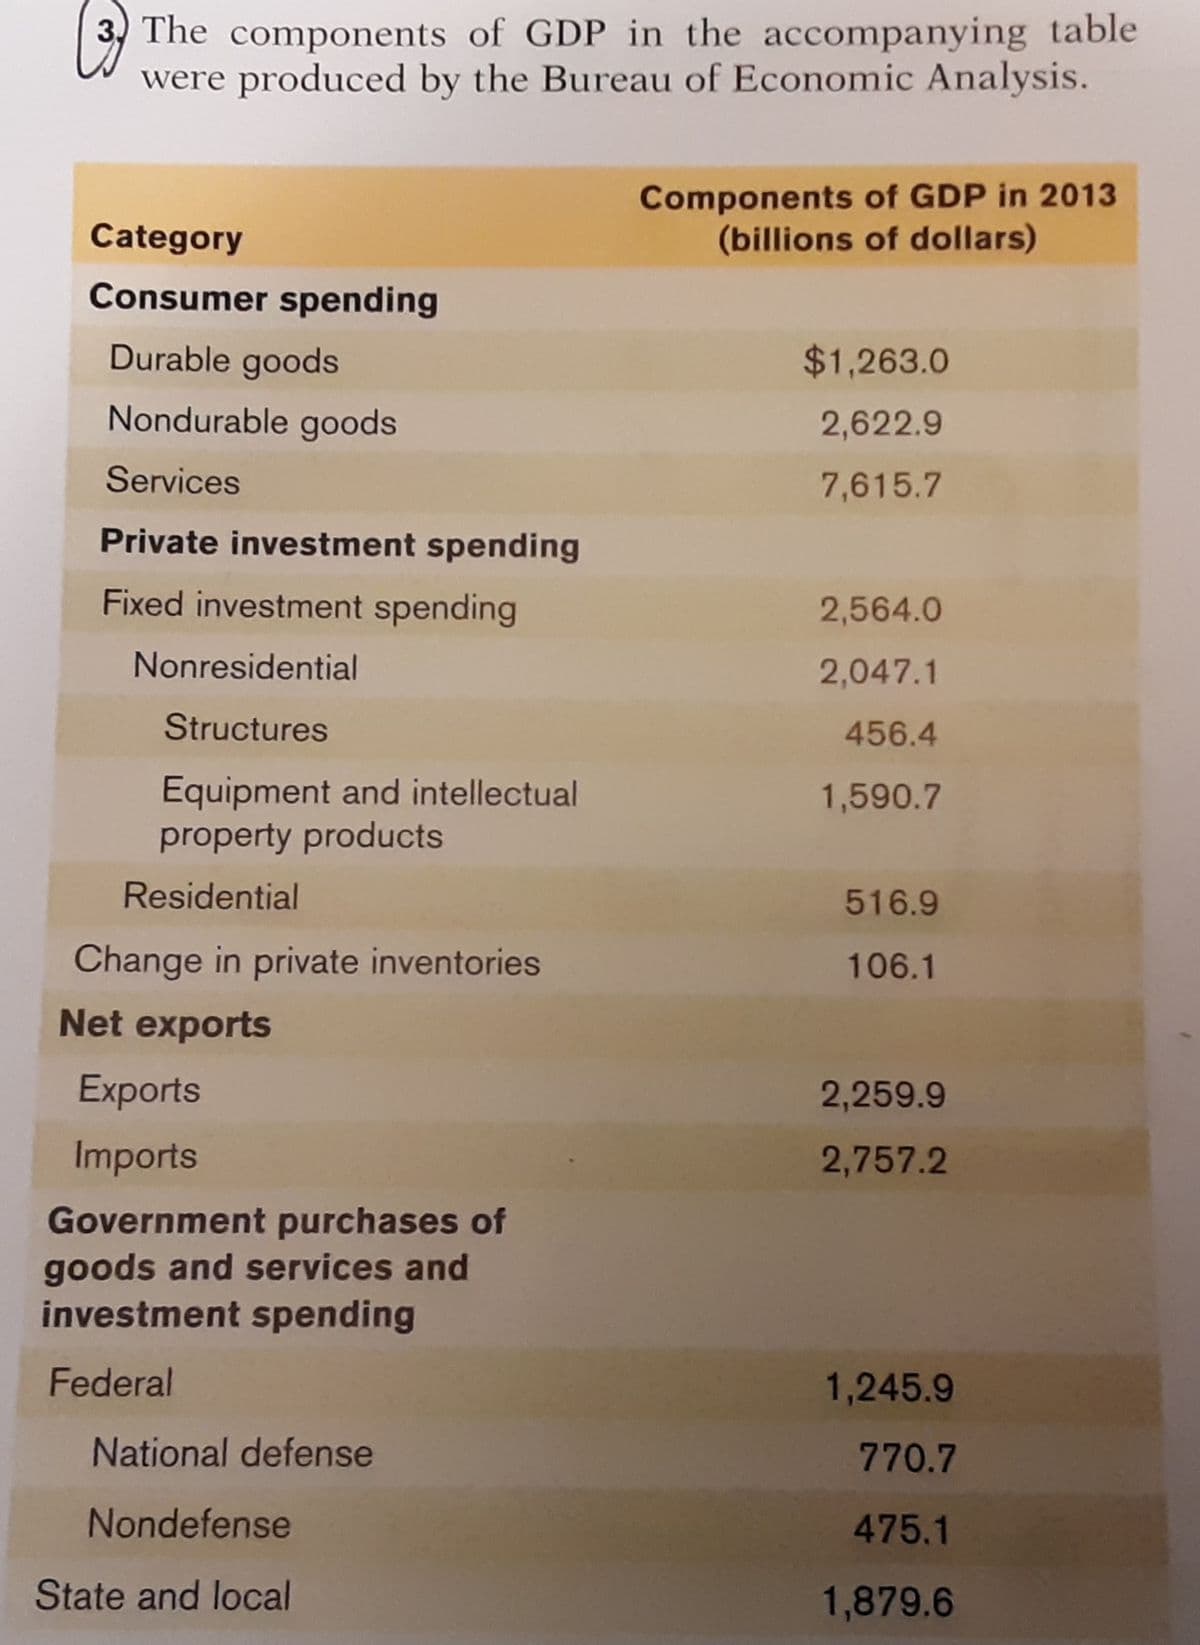 3) The components of GDP in the accompanying table
were produced by the Bureau of Economic Analysis.
Components of GDP in 2013
(billions of dollars)
Category
Consumer spending
Durable goods
$1,263.0
Nondurable goods
2,622.9
Services
7,615.7
Private investment spending
Fixed investment spending
2,564.0
Nonresidential
2,047.1
Structures
456.4
Equipment and intellectual
property products
1,590.7
Residential
516.9
Change in private inventories
106.1
Net exports
Exports
2,259.9
Imports
2,757.2
Government purchases of
goods and services and
investment spending
Federal
1,245.9
National defense
770.7
Nondefense
475.1
State and local
1,879.6
